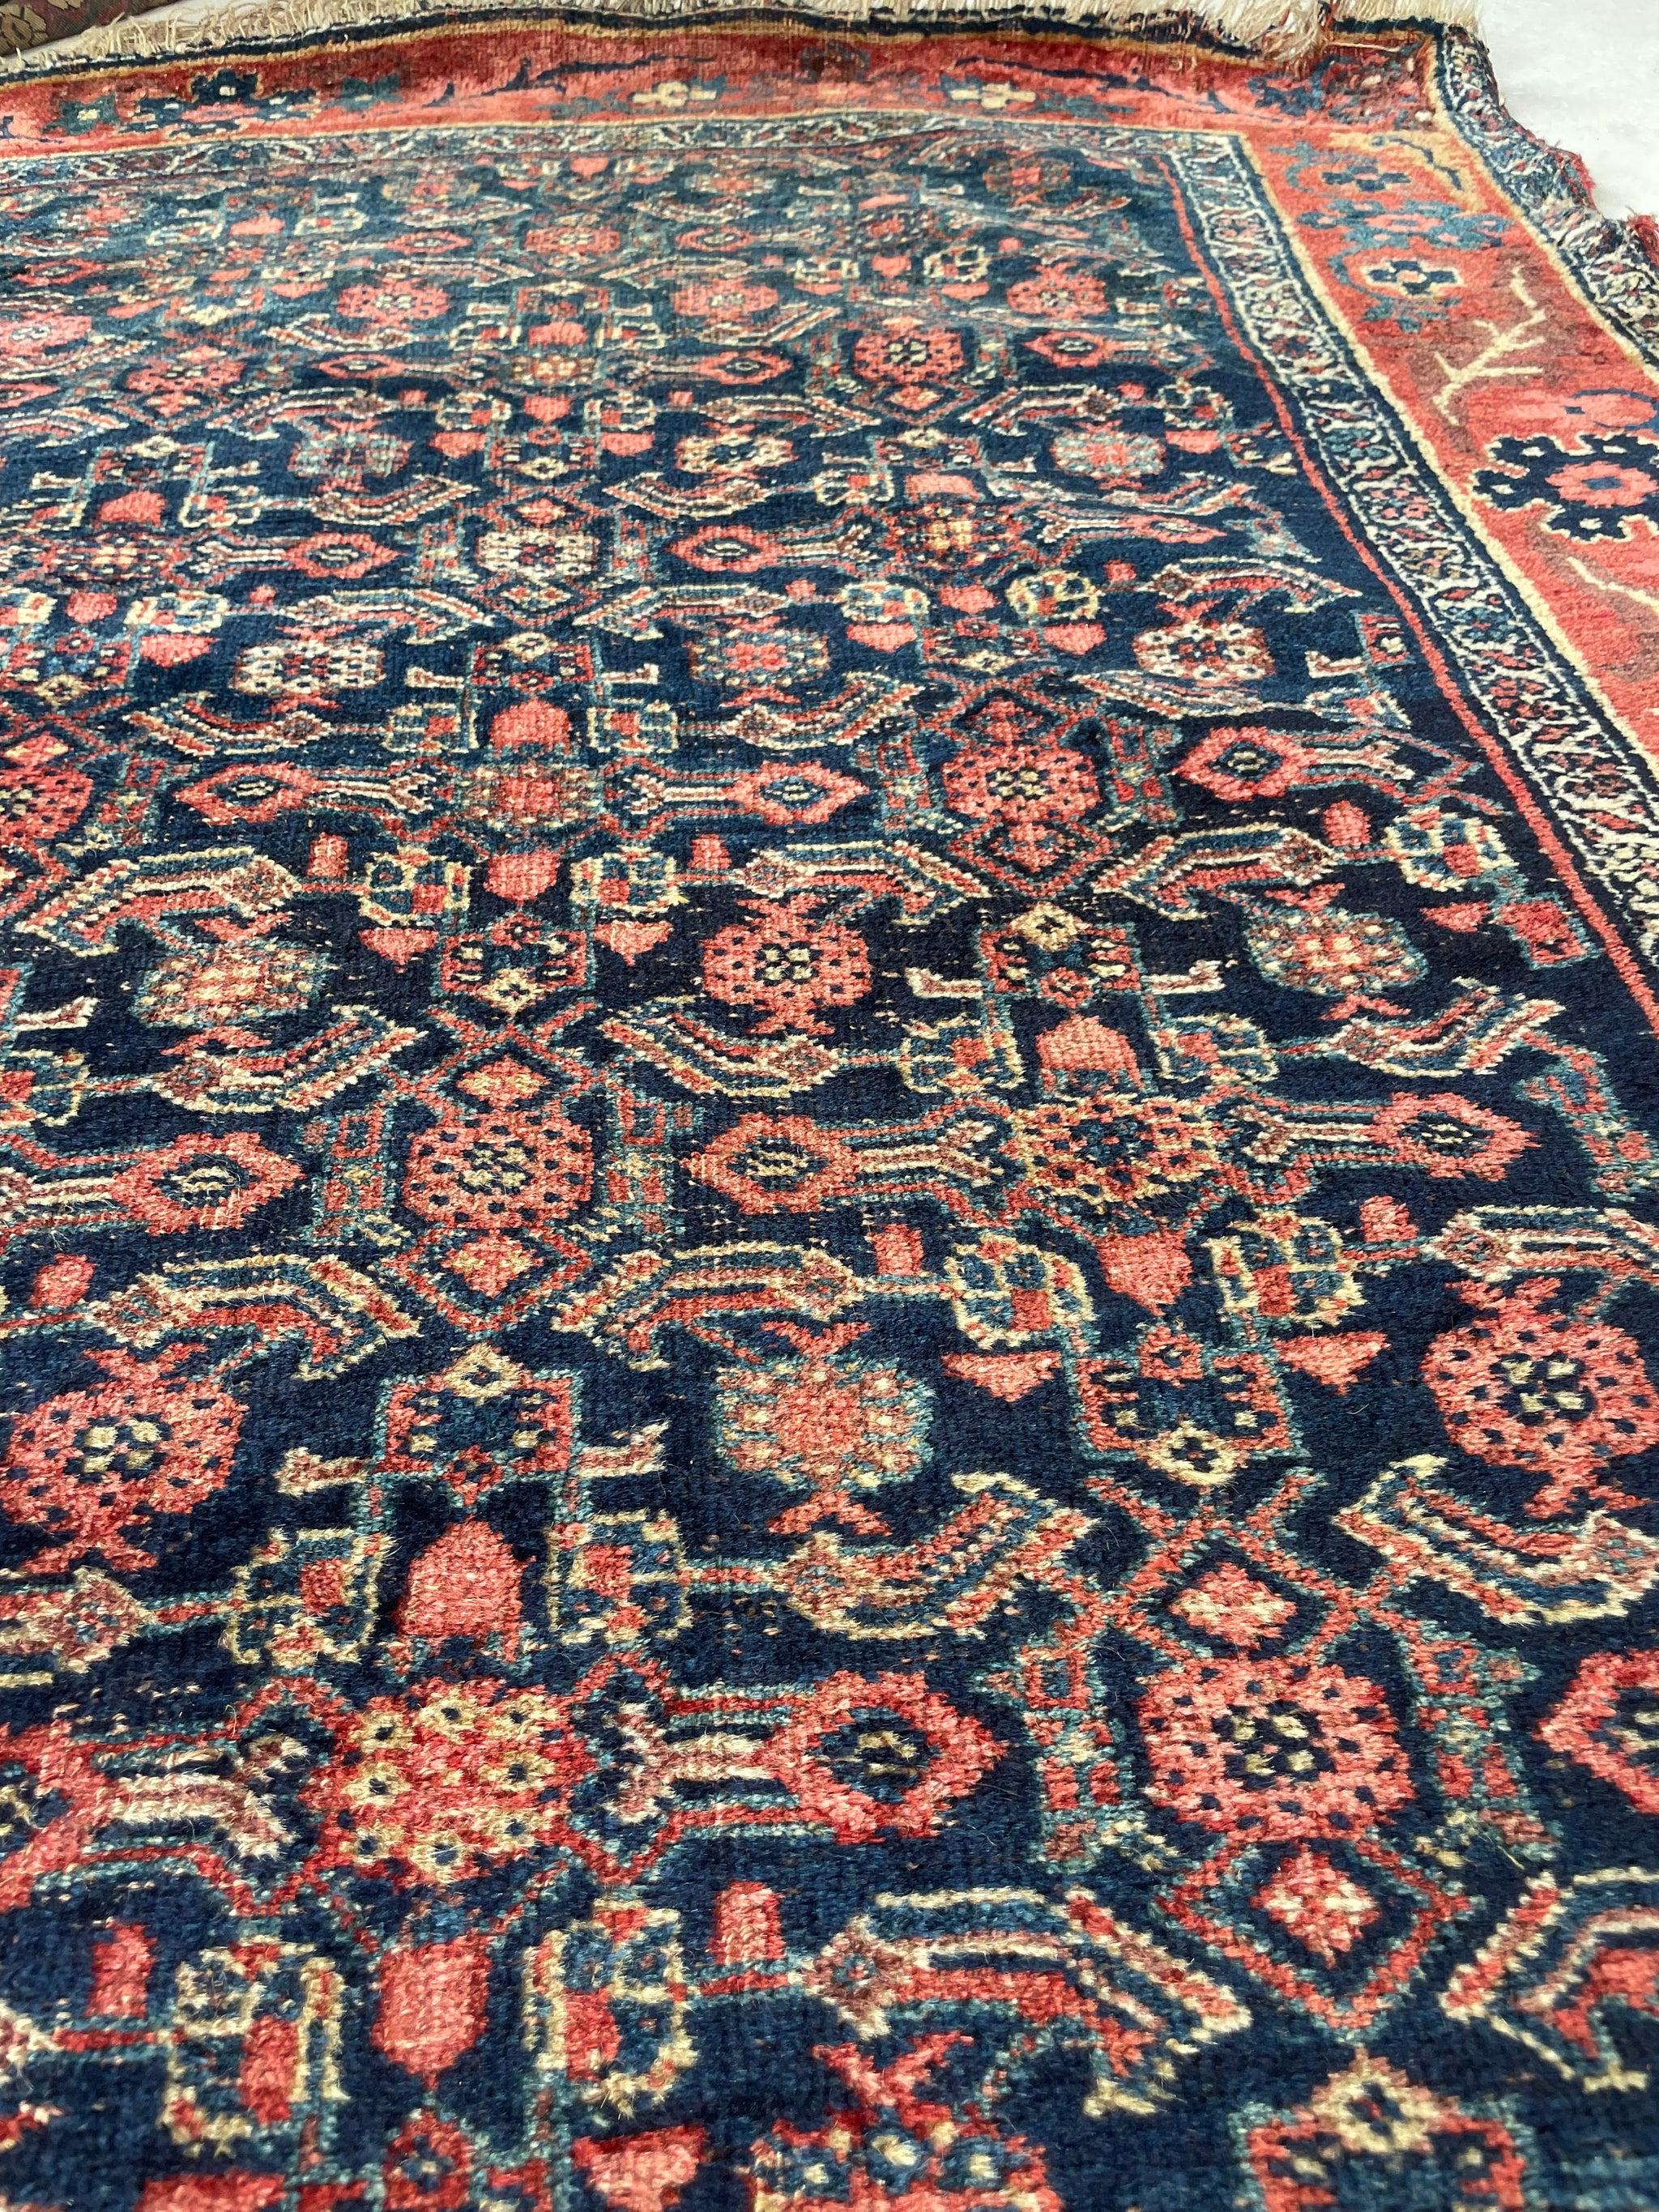 Antique Gorgeous Halvai Bidjar with Growing Vine Border Rug, circa 1920's In Good Condition For Sale In Milwaukee, WI